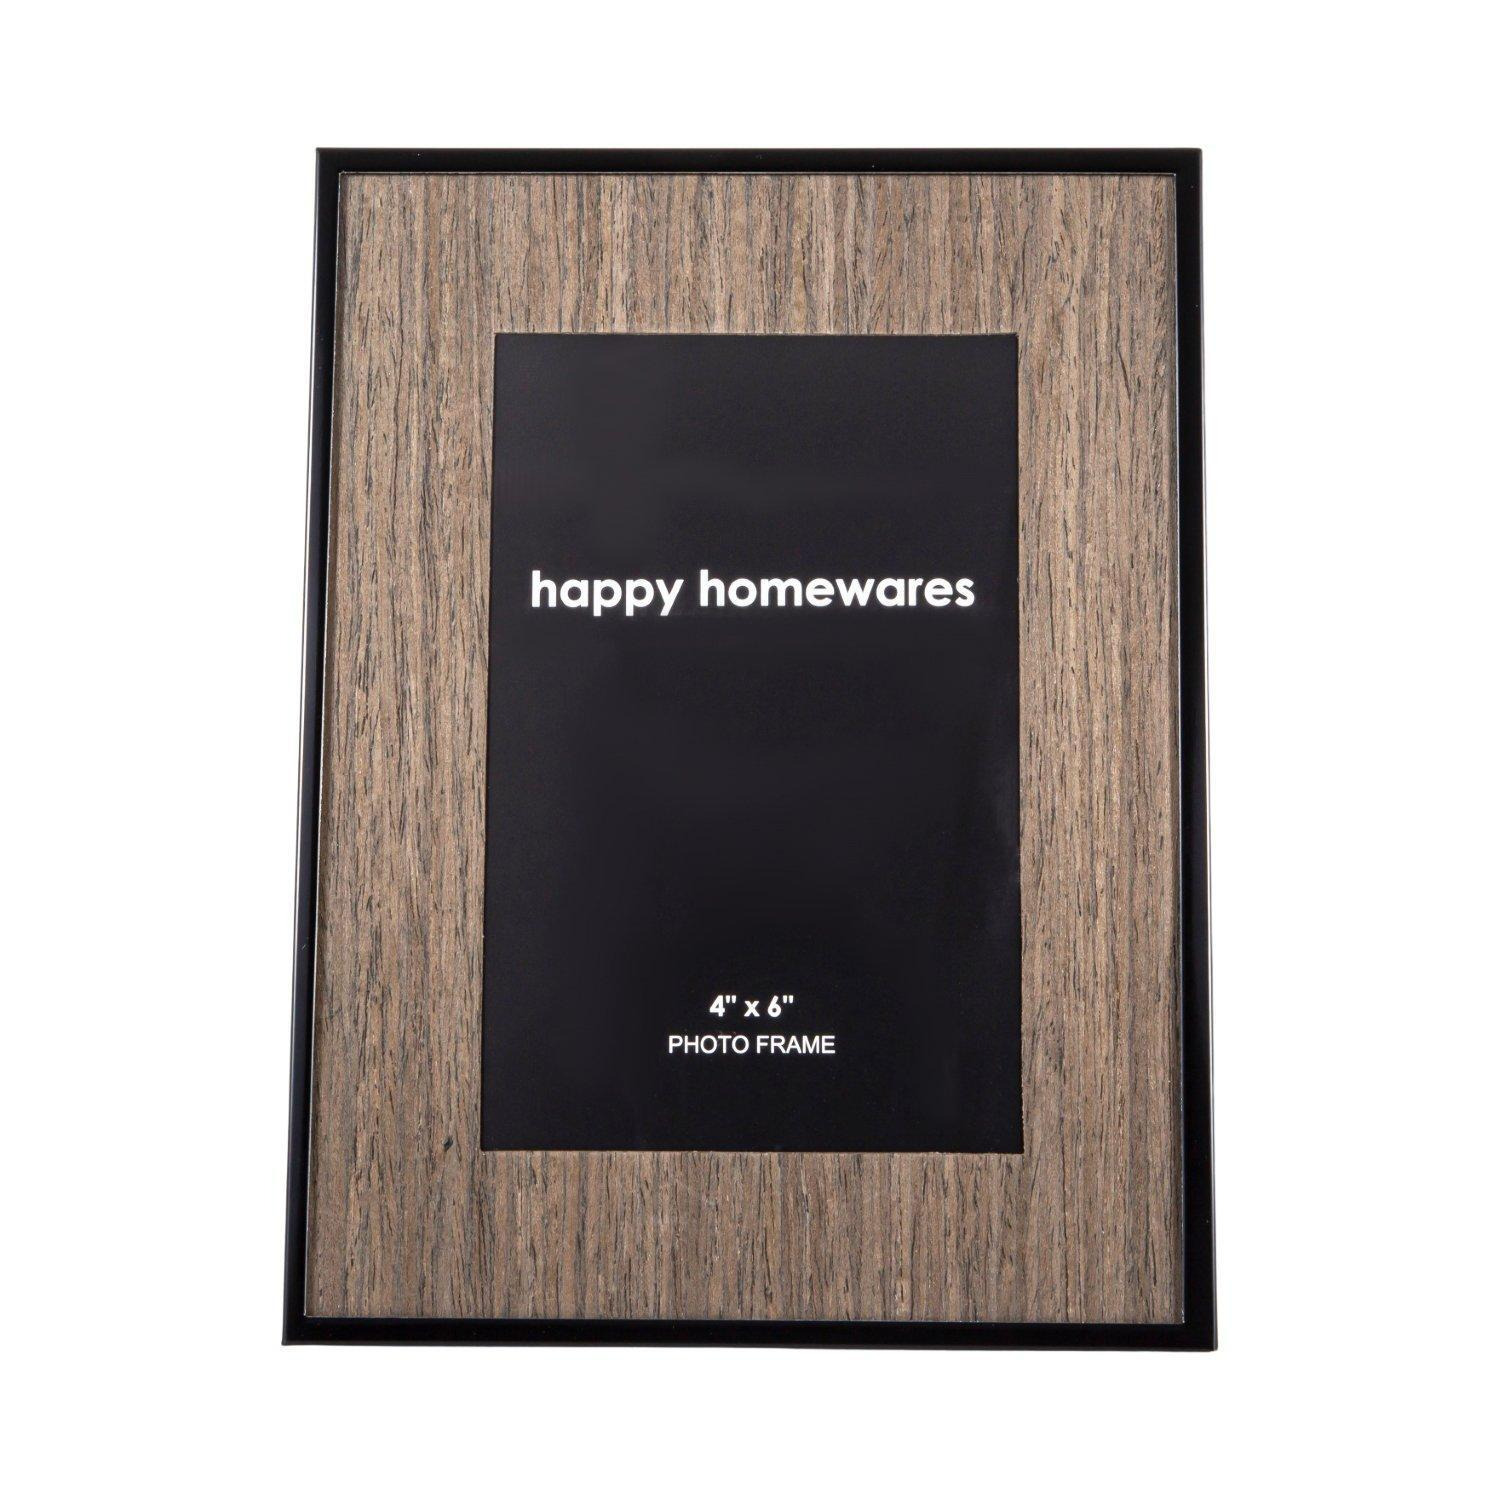 Traditional Dark Wood Effect 4x6 Picture Frame with Black Gloss Metal Trim - image 1